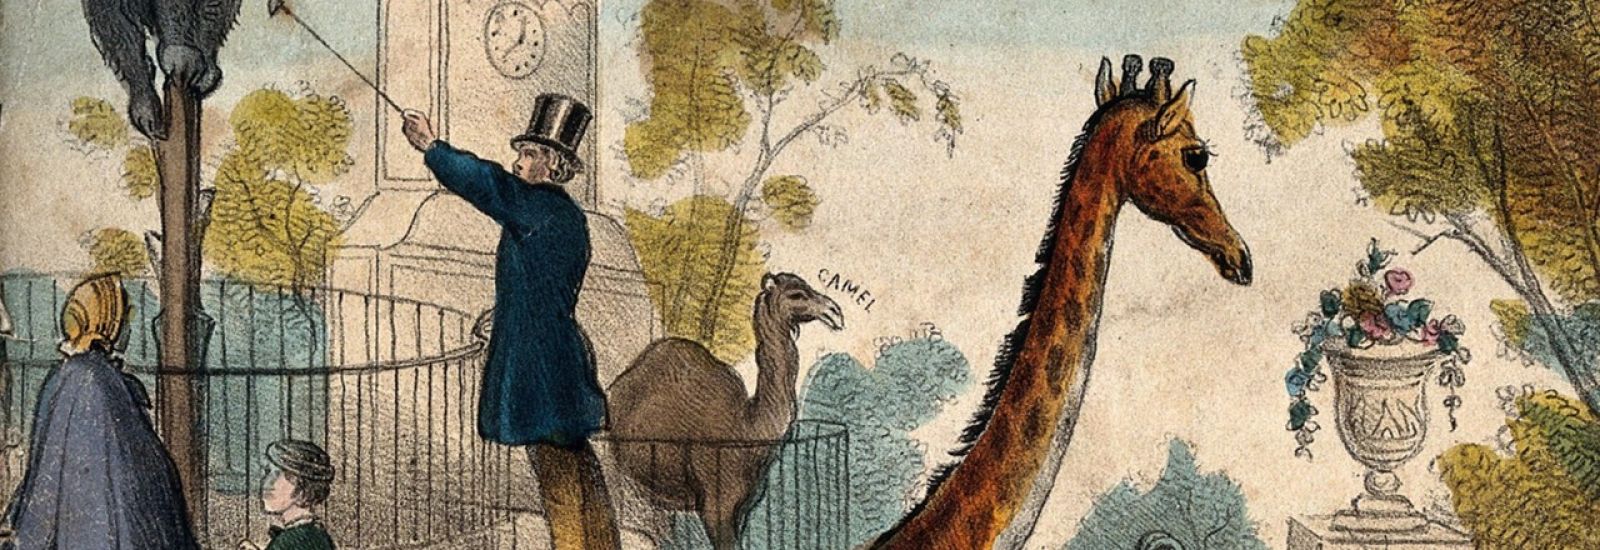 Coloured lithograph of 19th century zoo, with a giraffe in the foreground and a top-hatted man baiting a bear on a pole behind. Watching him are a woman and child with their backs to us.